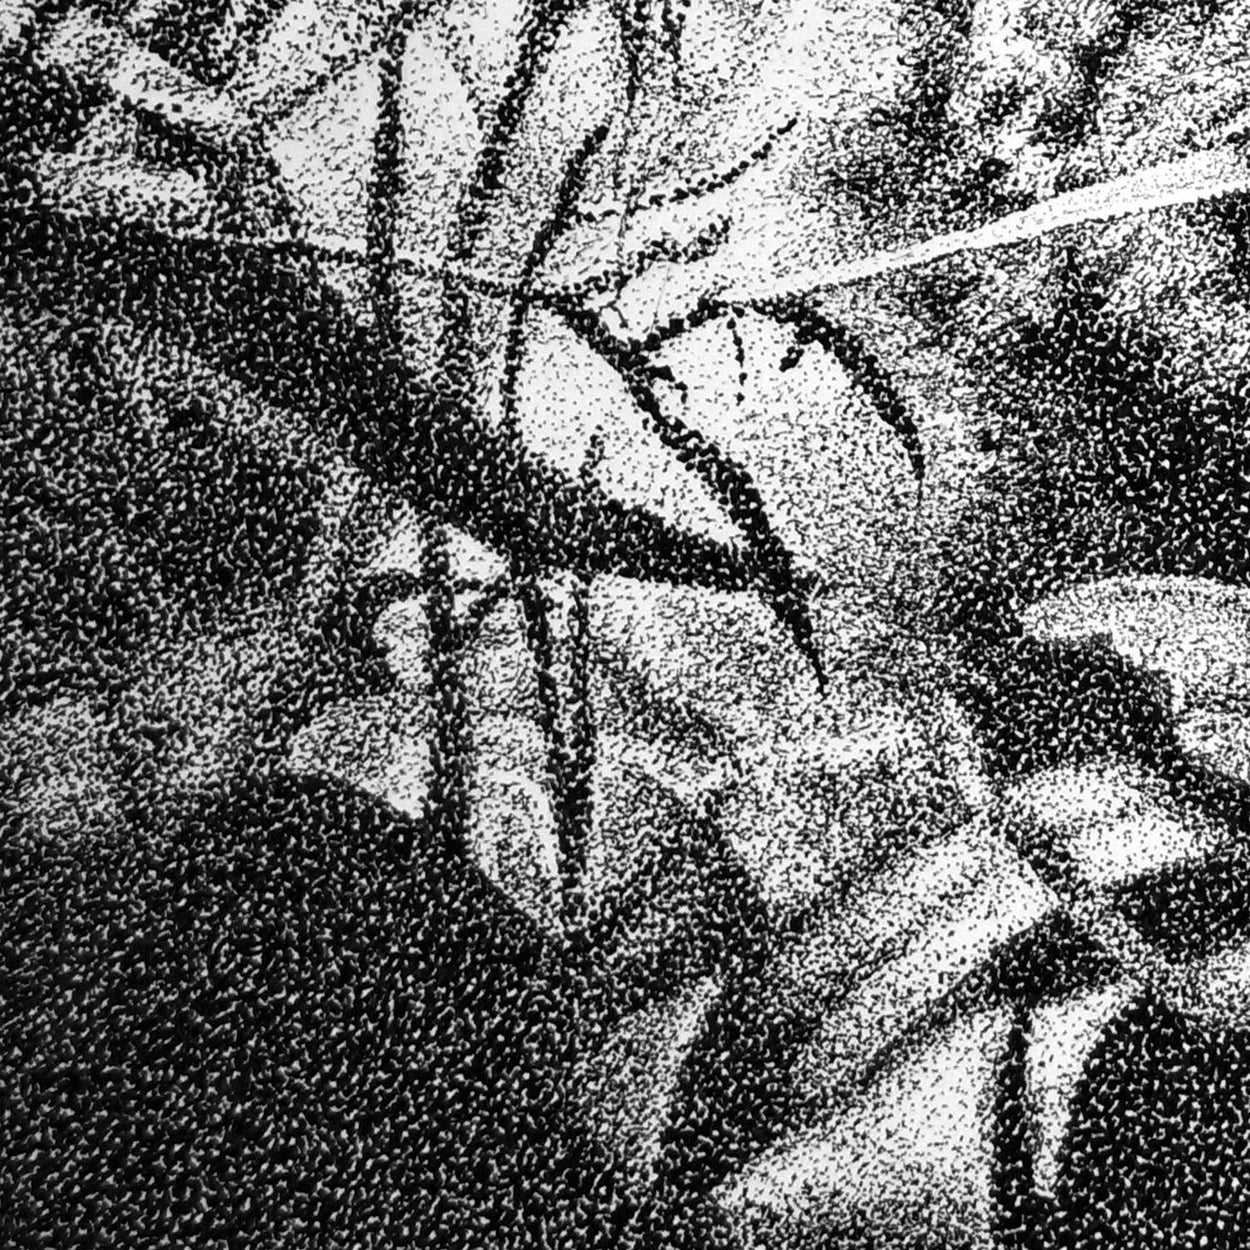 Pen Stippling Close-up - The Thriving Wild